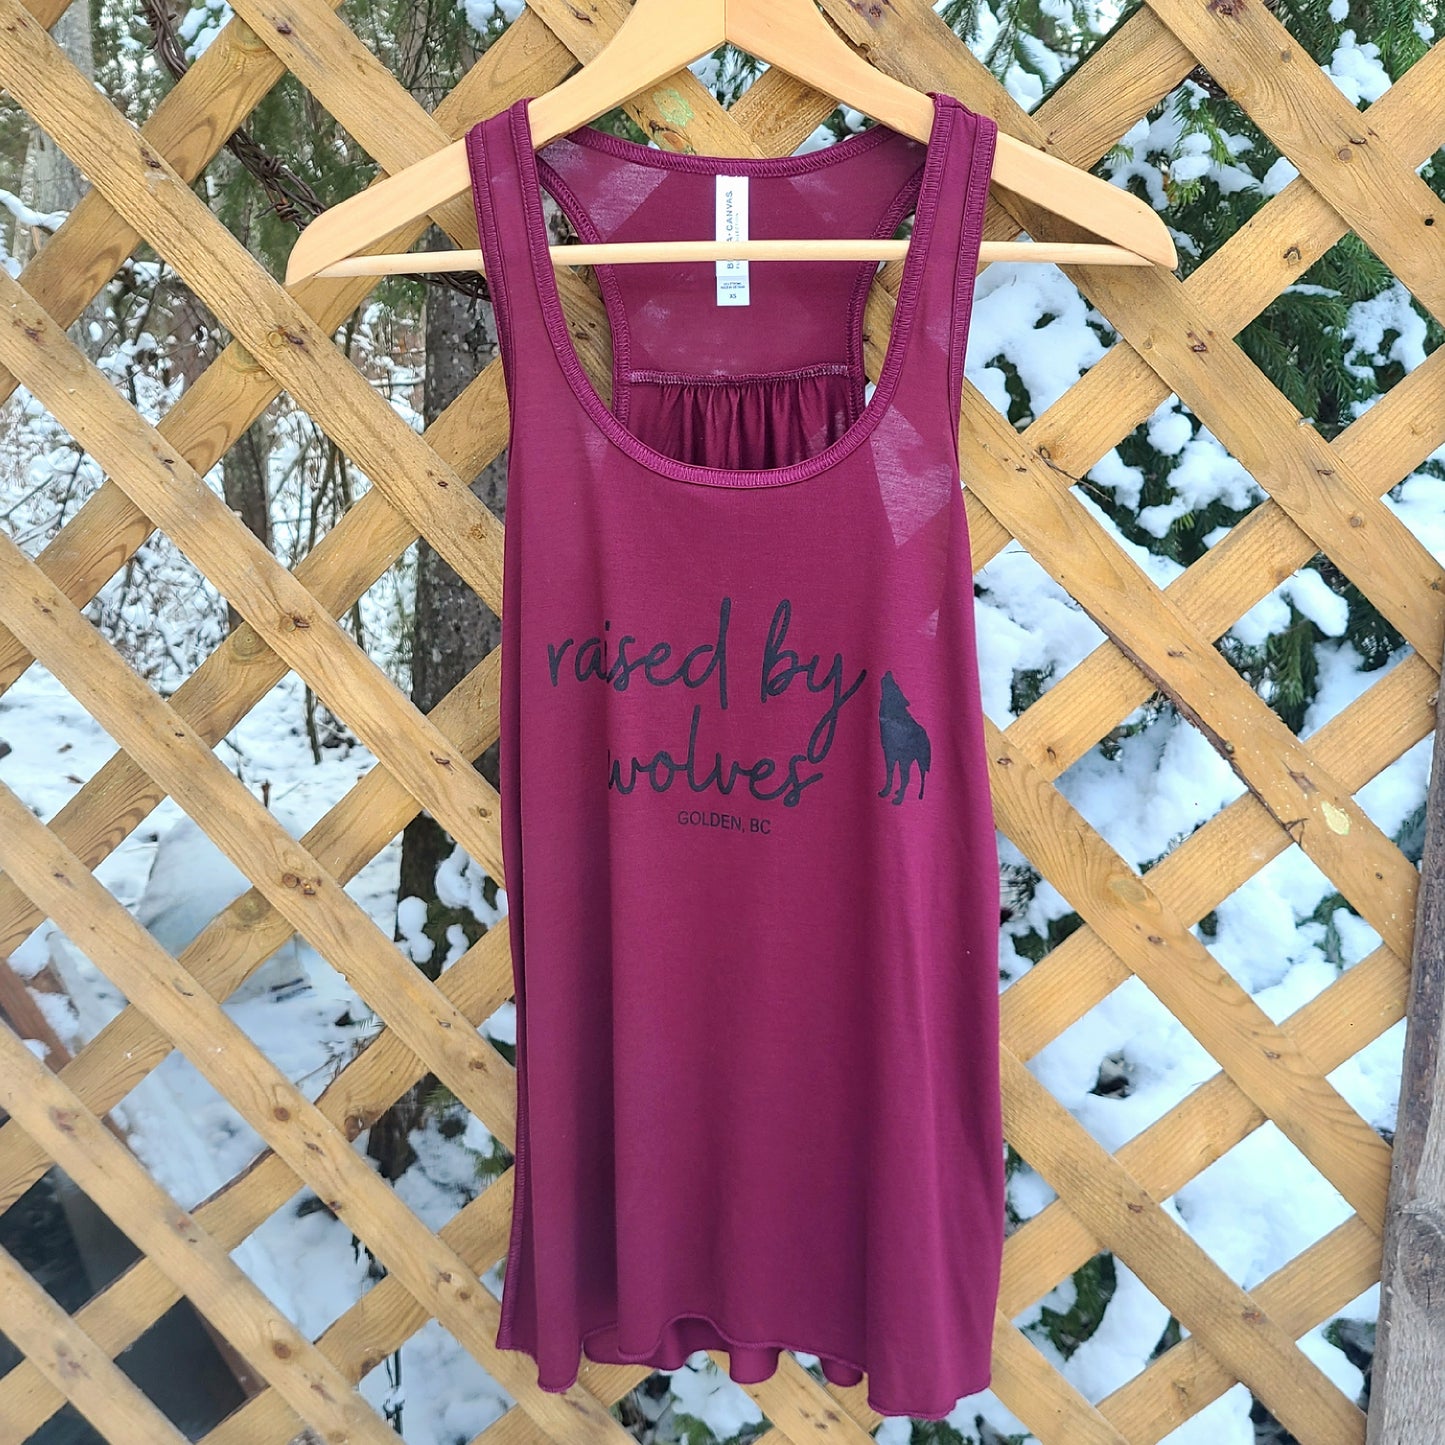 'Raised by Wolves' Lady's Tank Top